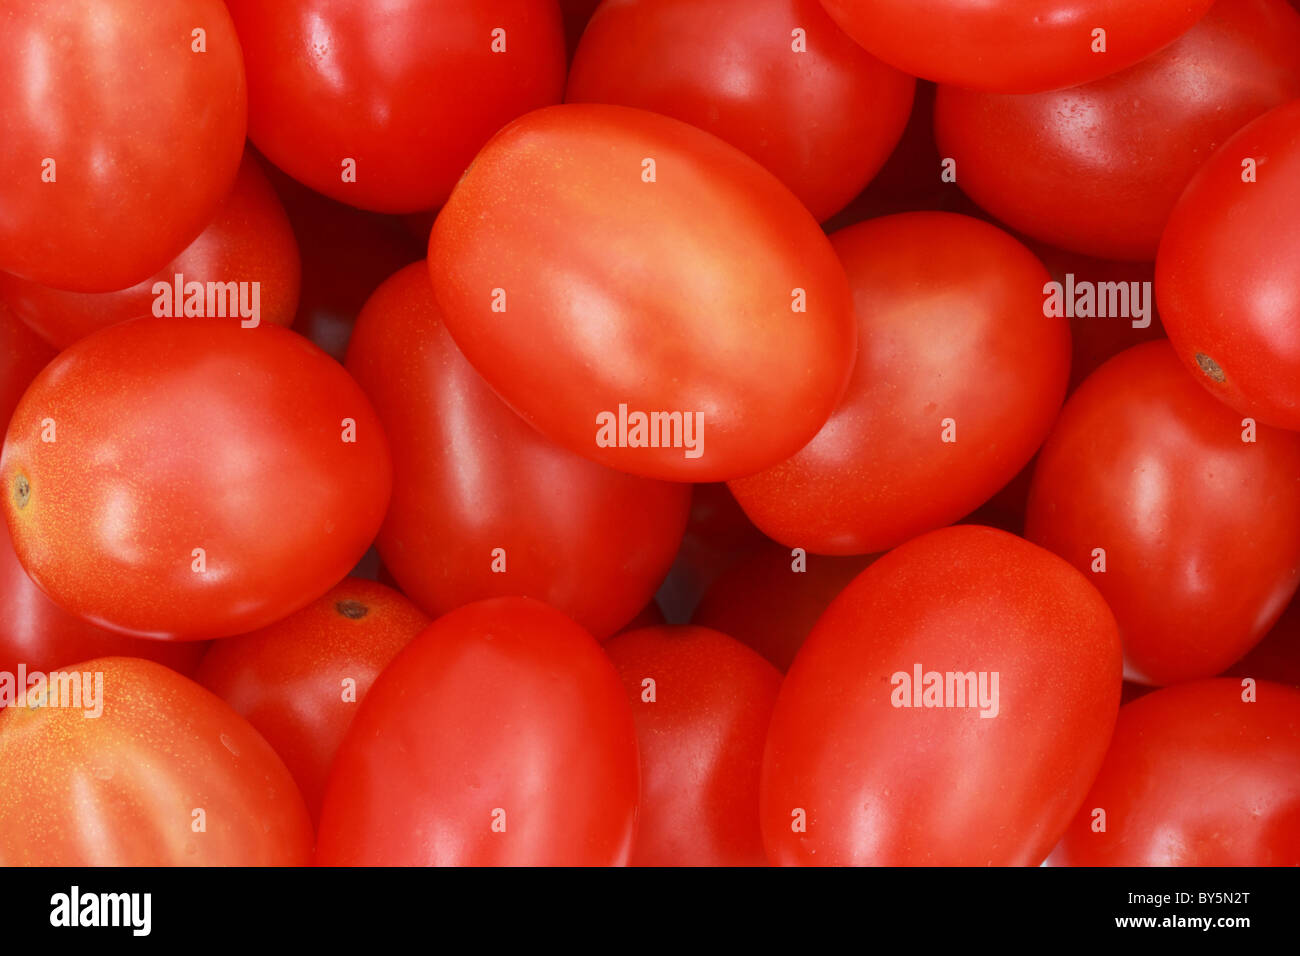 close up of many red cherry tomatoes making a background Stock Photo